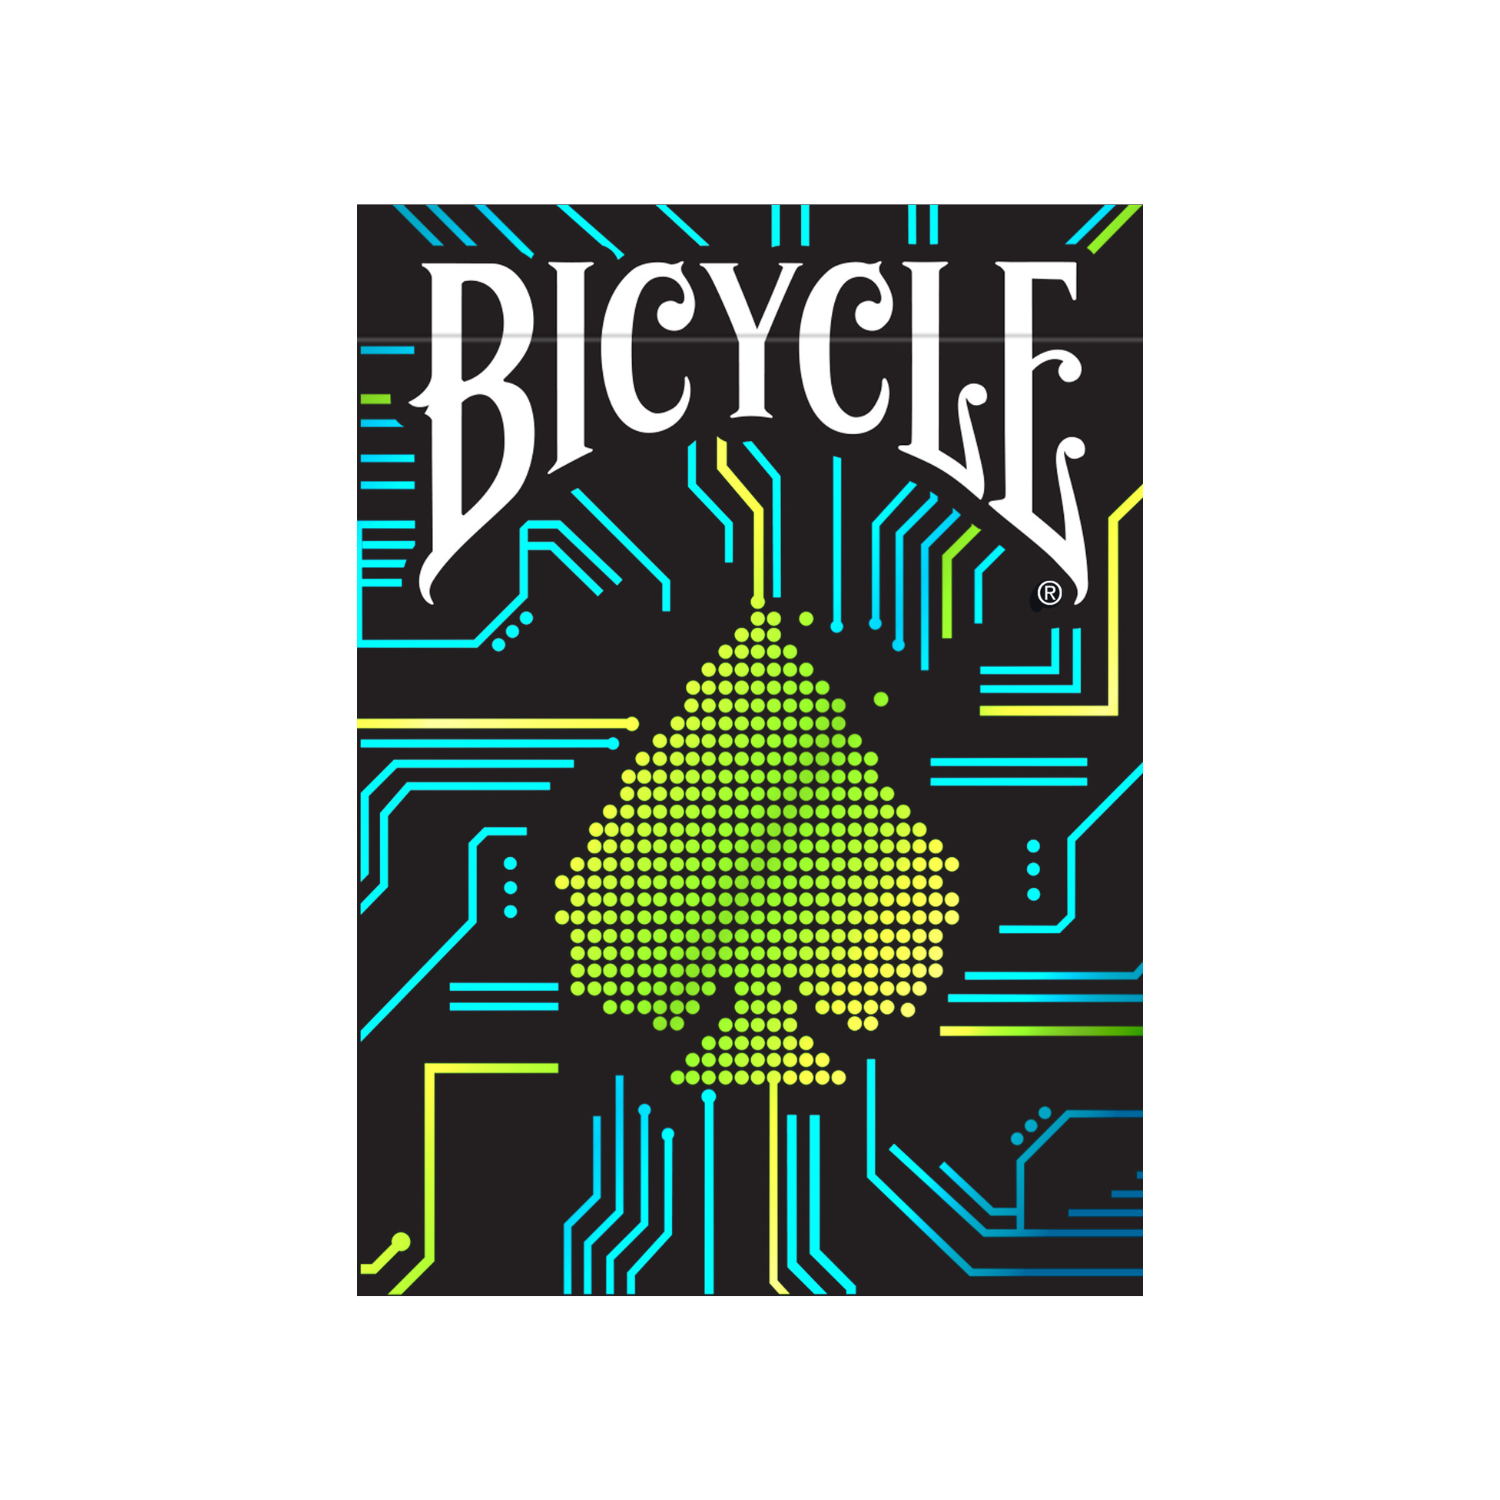 Image of a pack of Bicycle Dark Mode high-contrast low-vision friendly playing cards